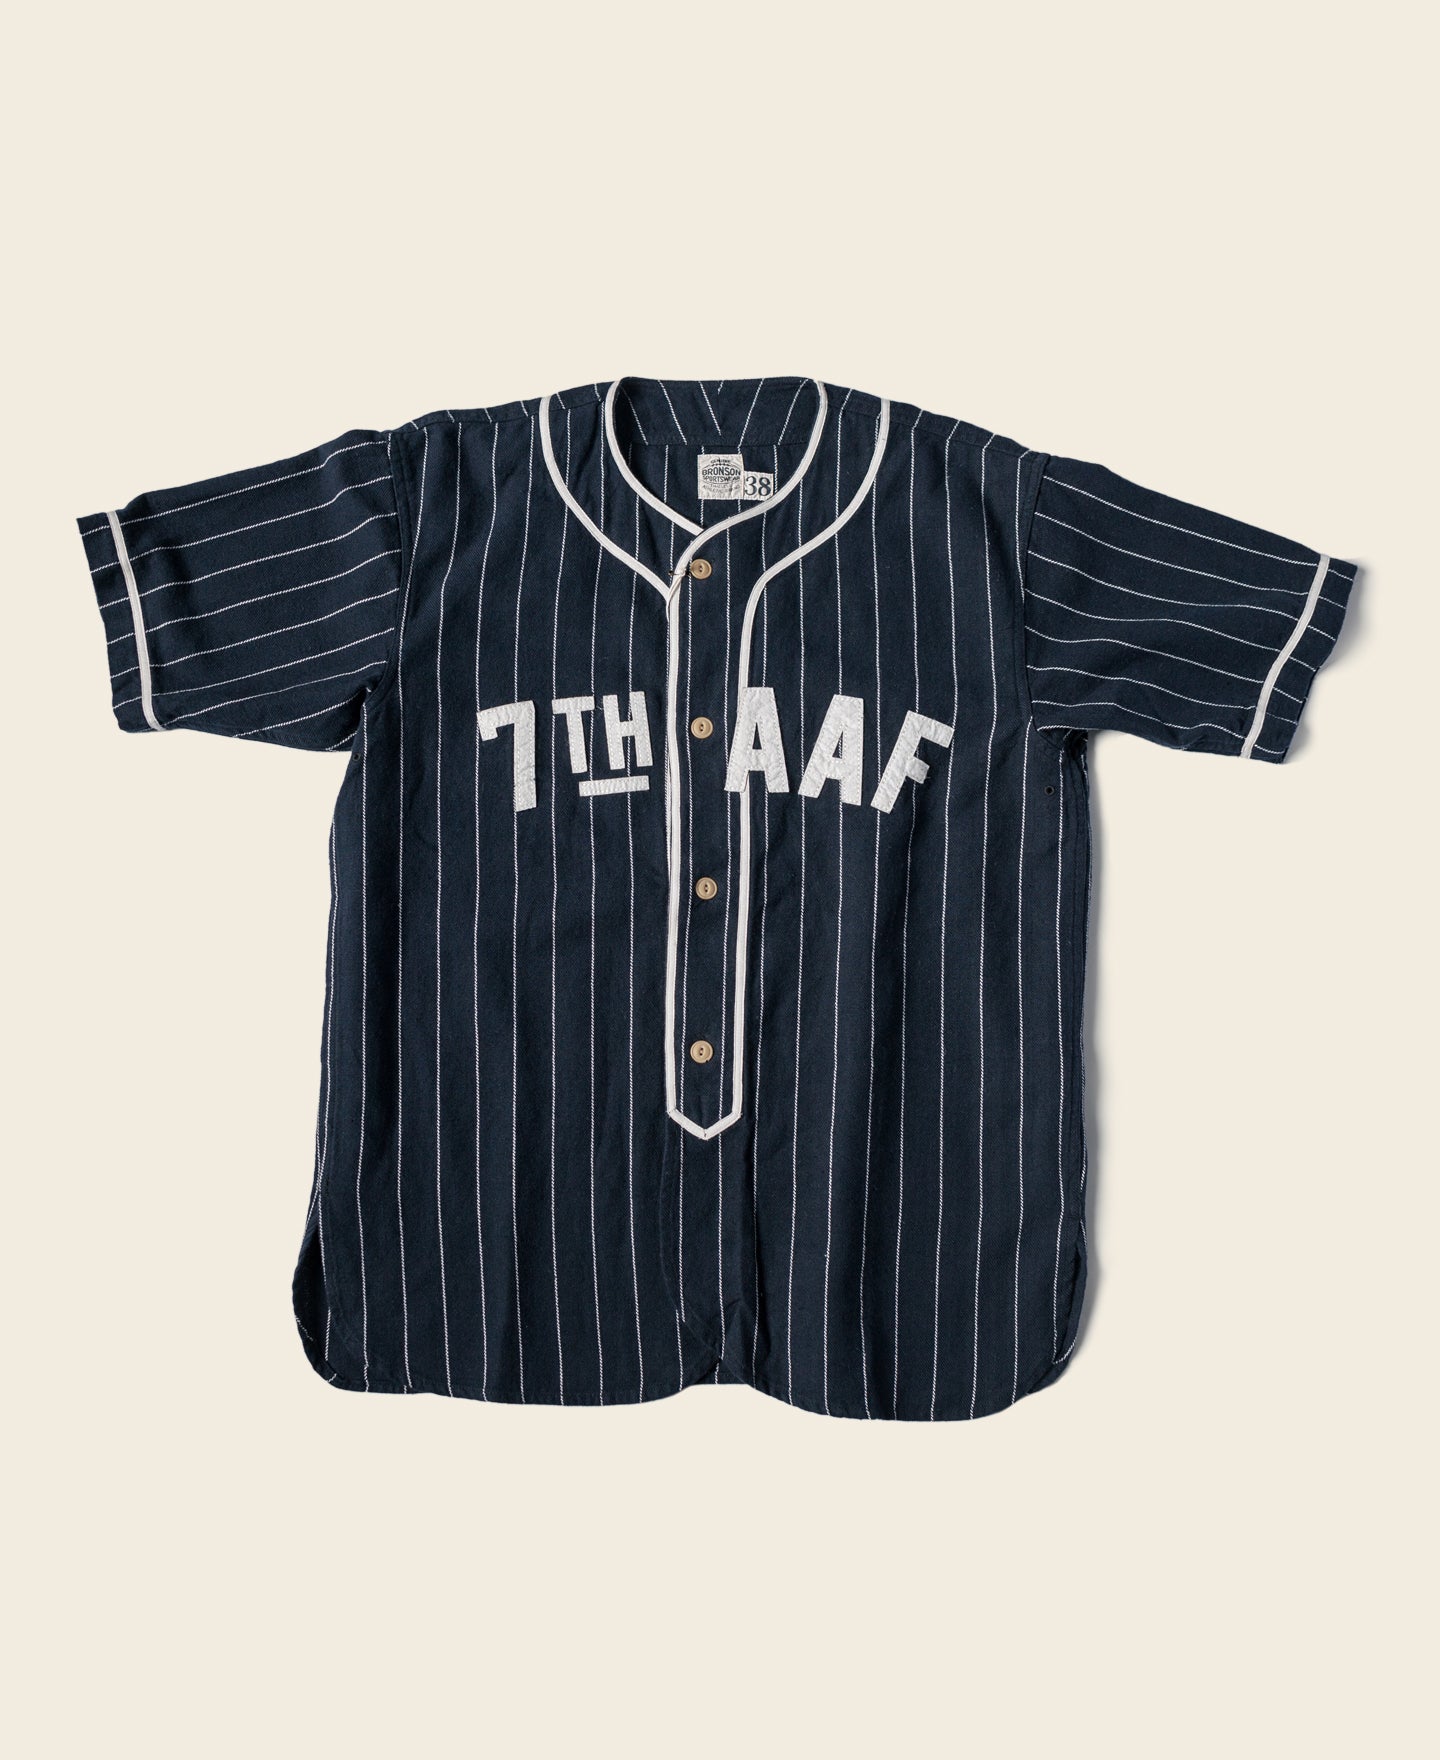 1940s WWII Military Baseball Shirt - 7th AFF